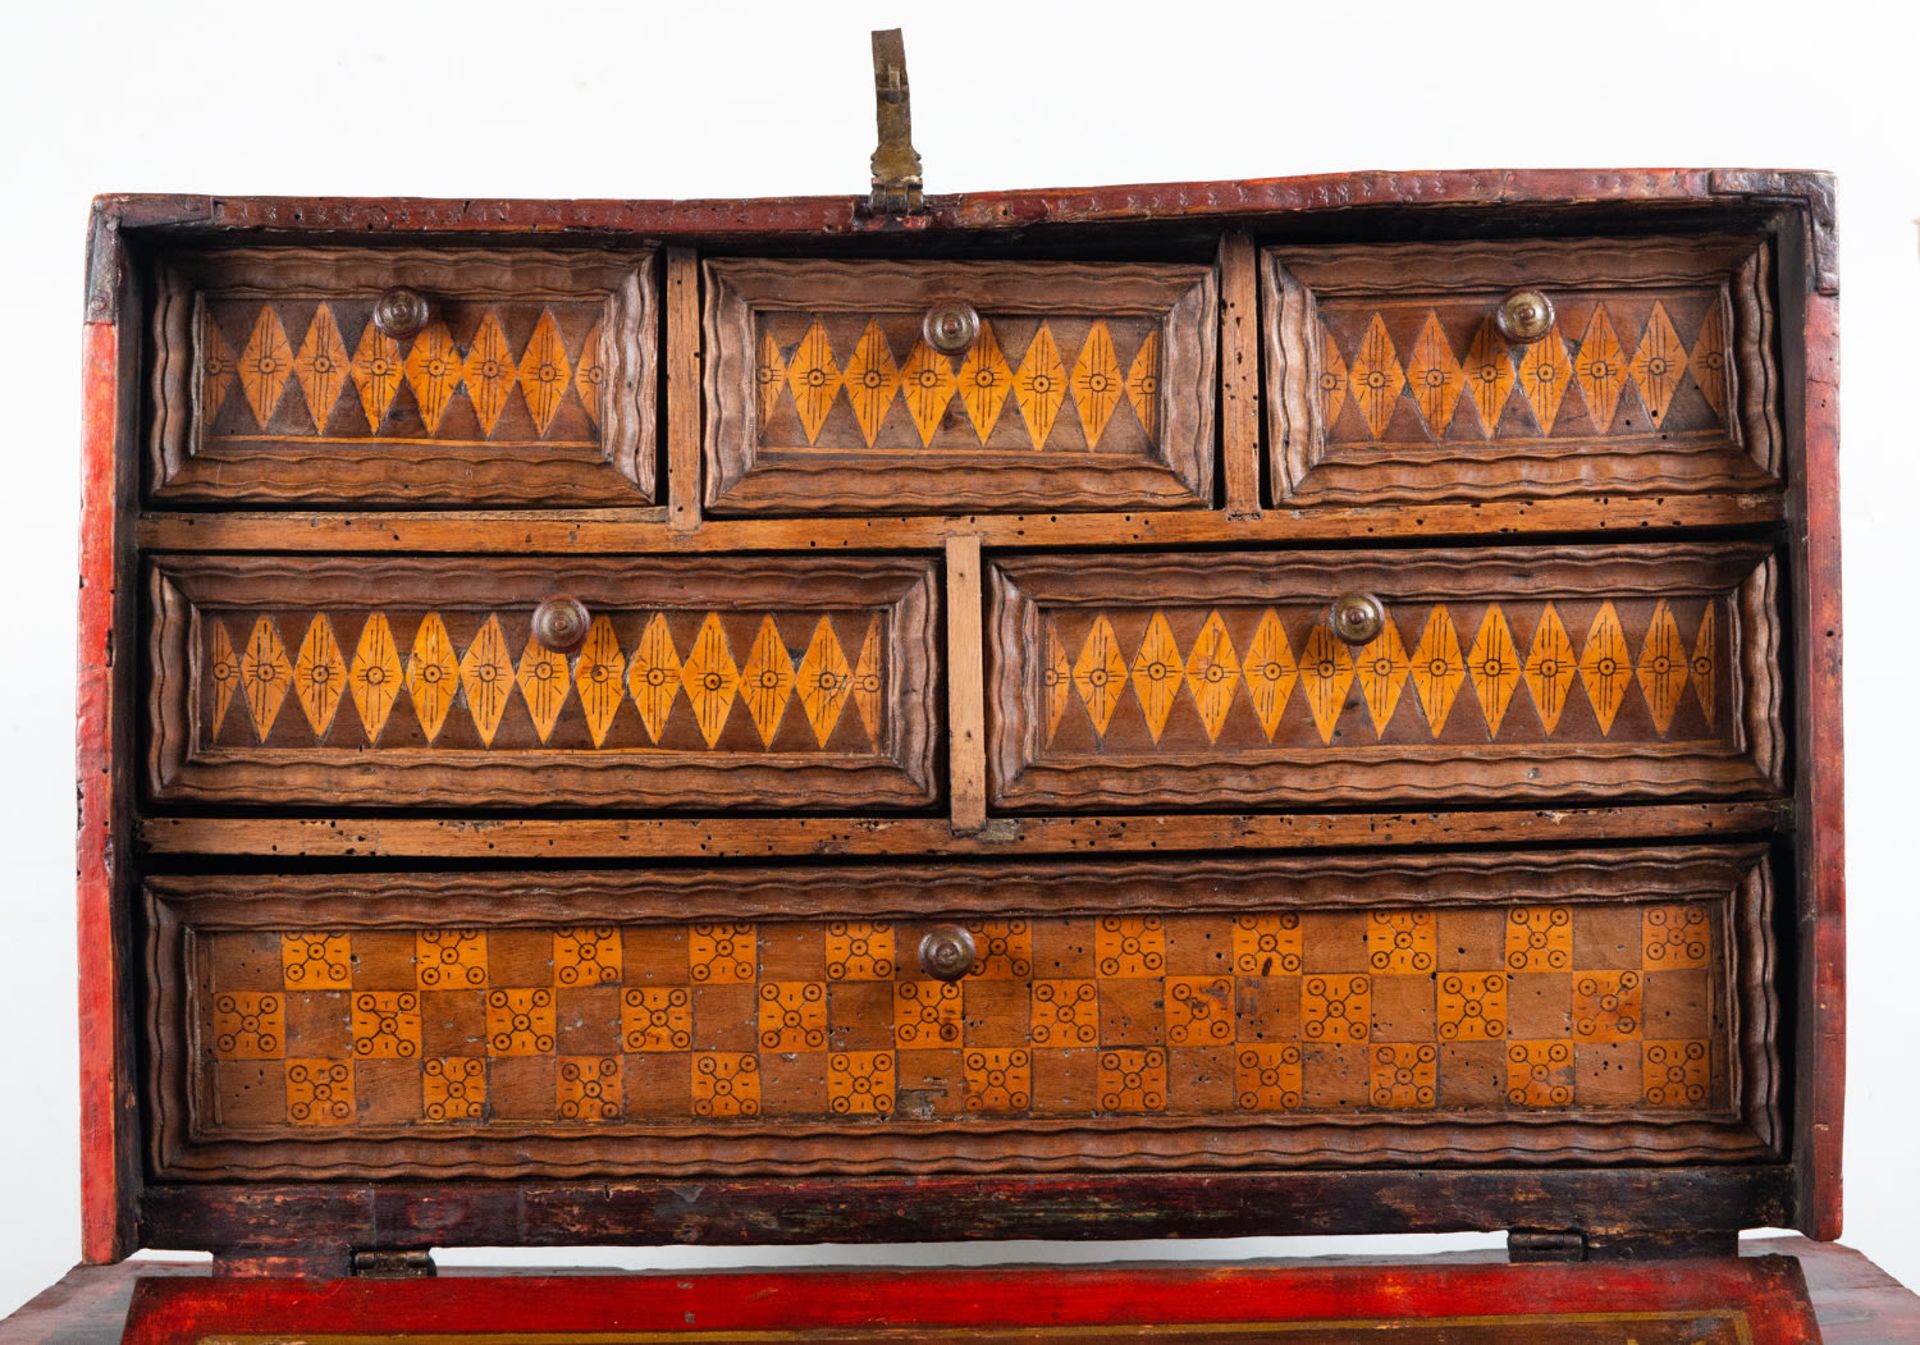 Mexican colonial style chest, 19th century - Image 2 of 8